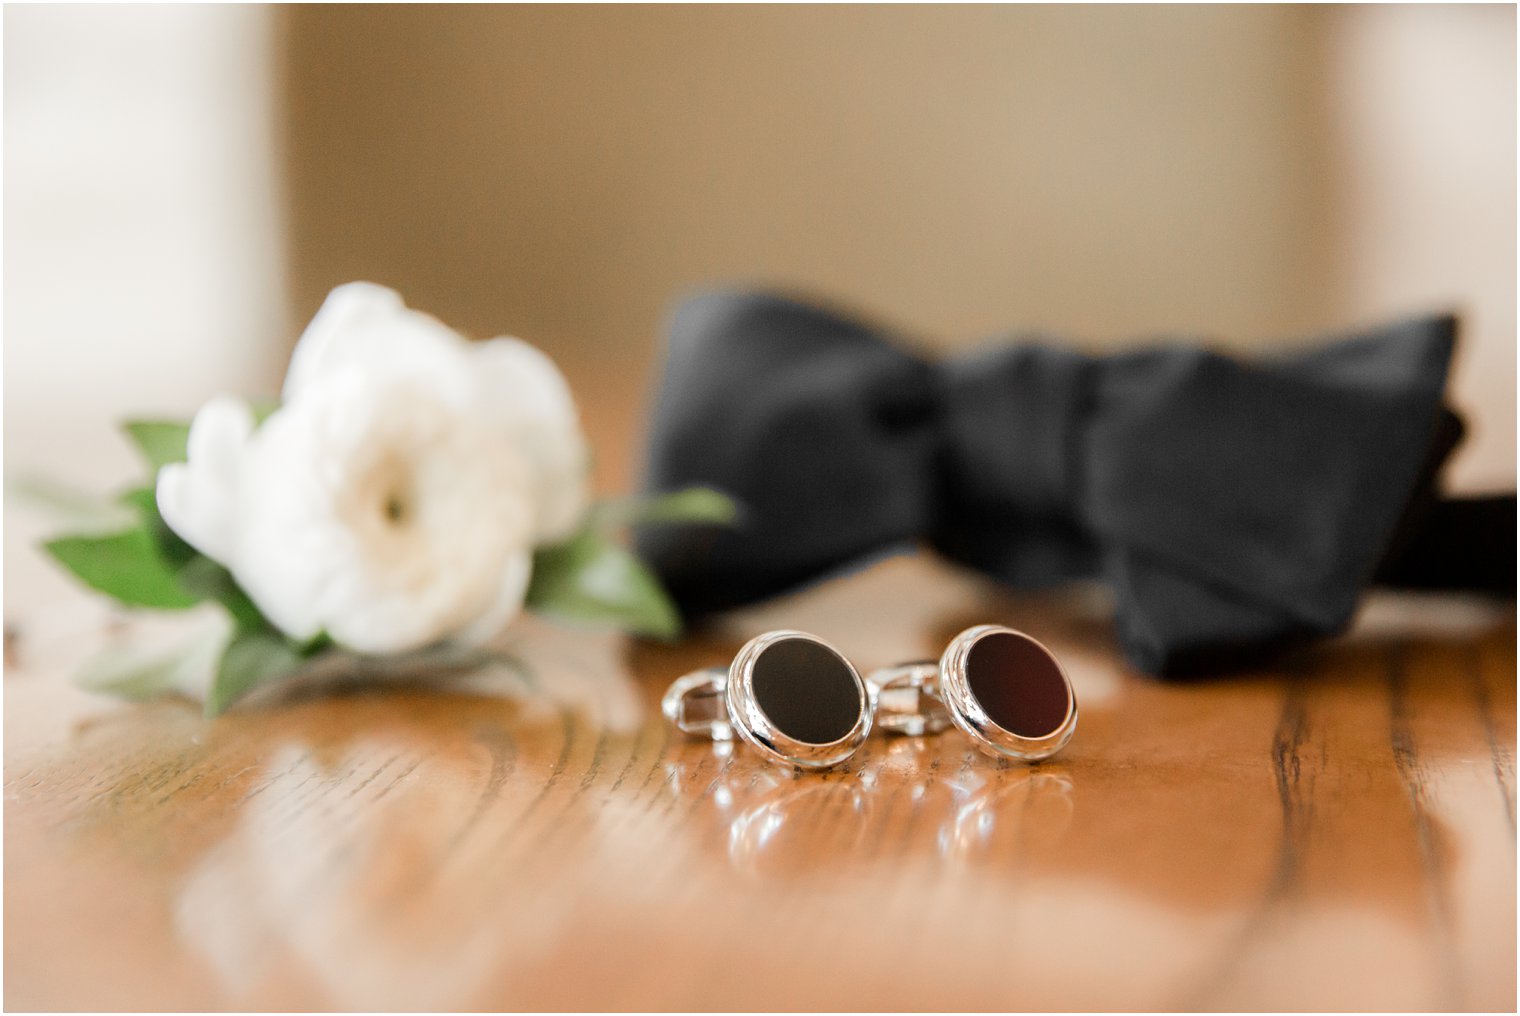 Groom's cufflinks with boutonniere and bow tie